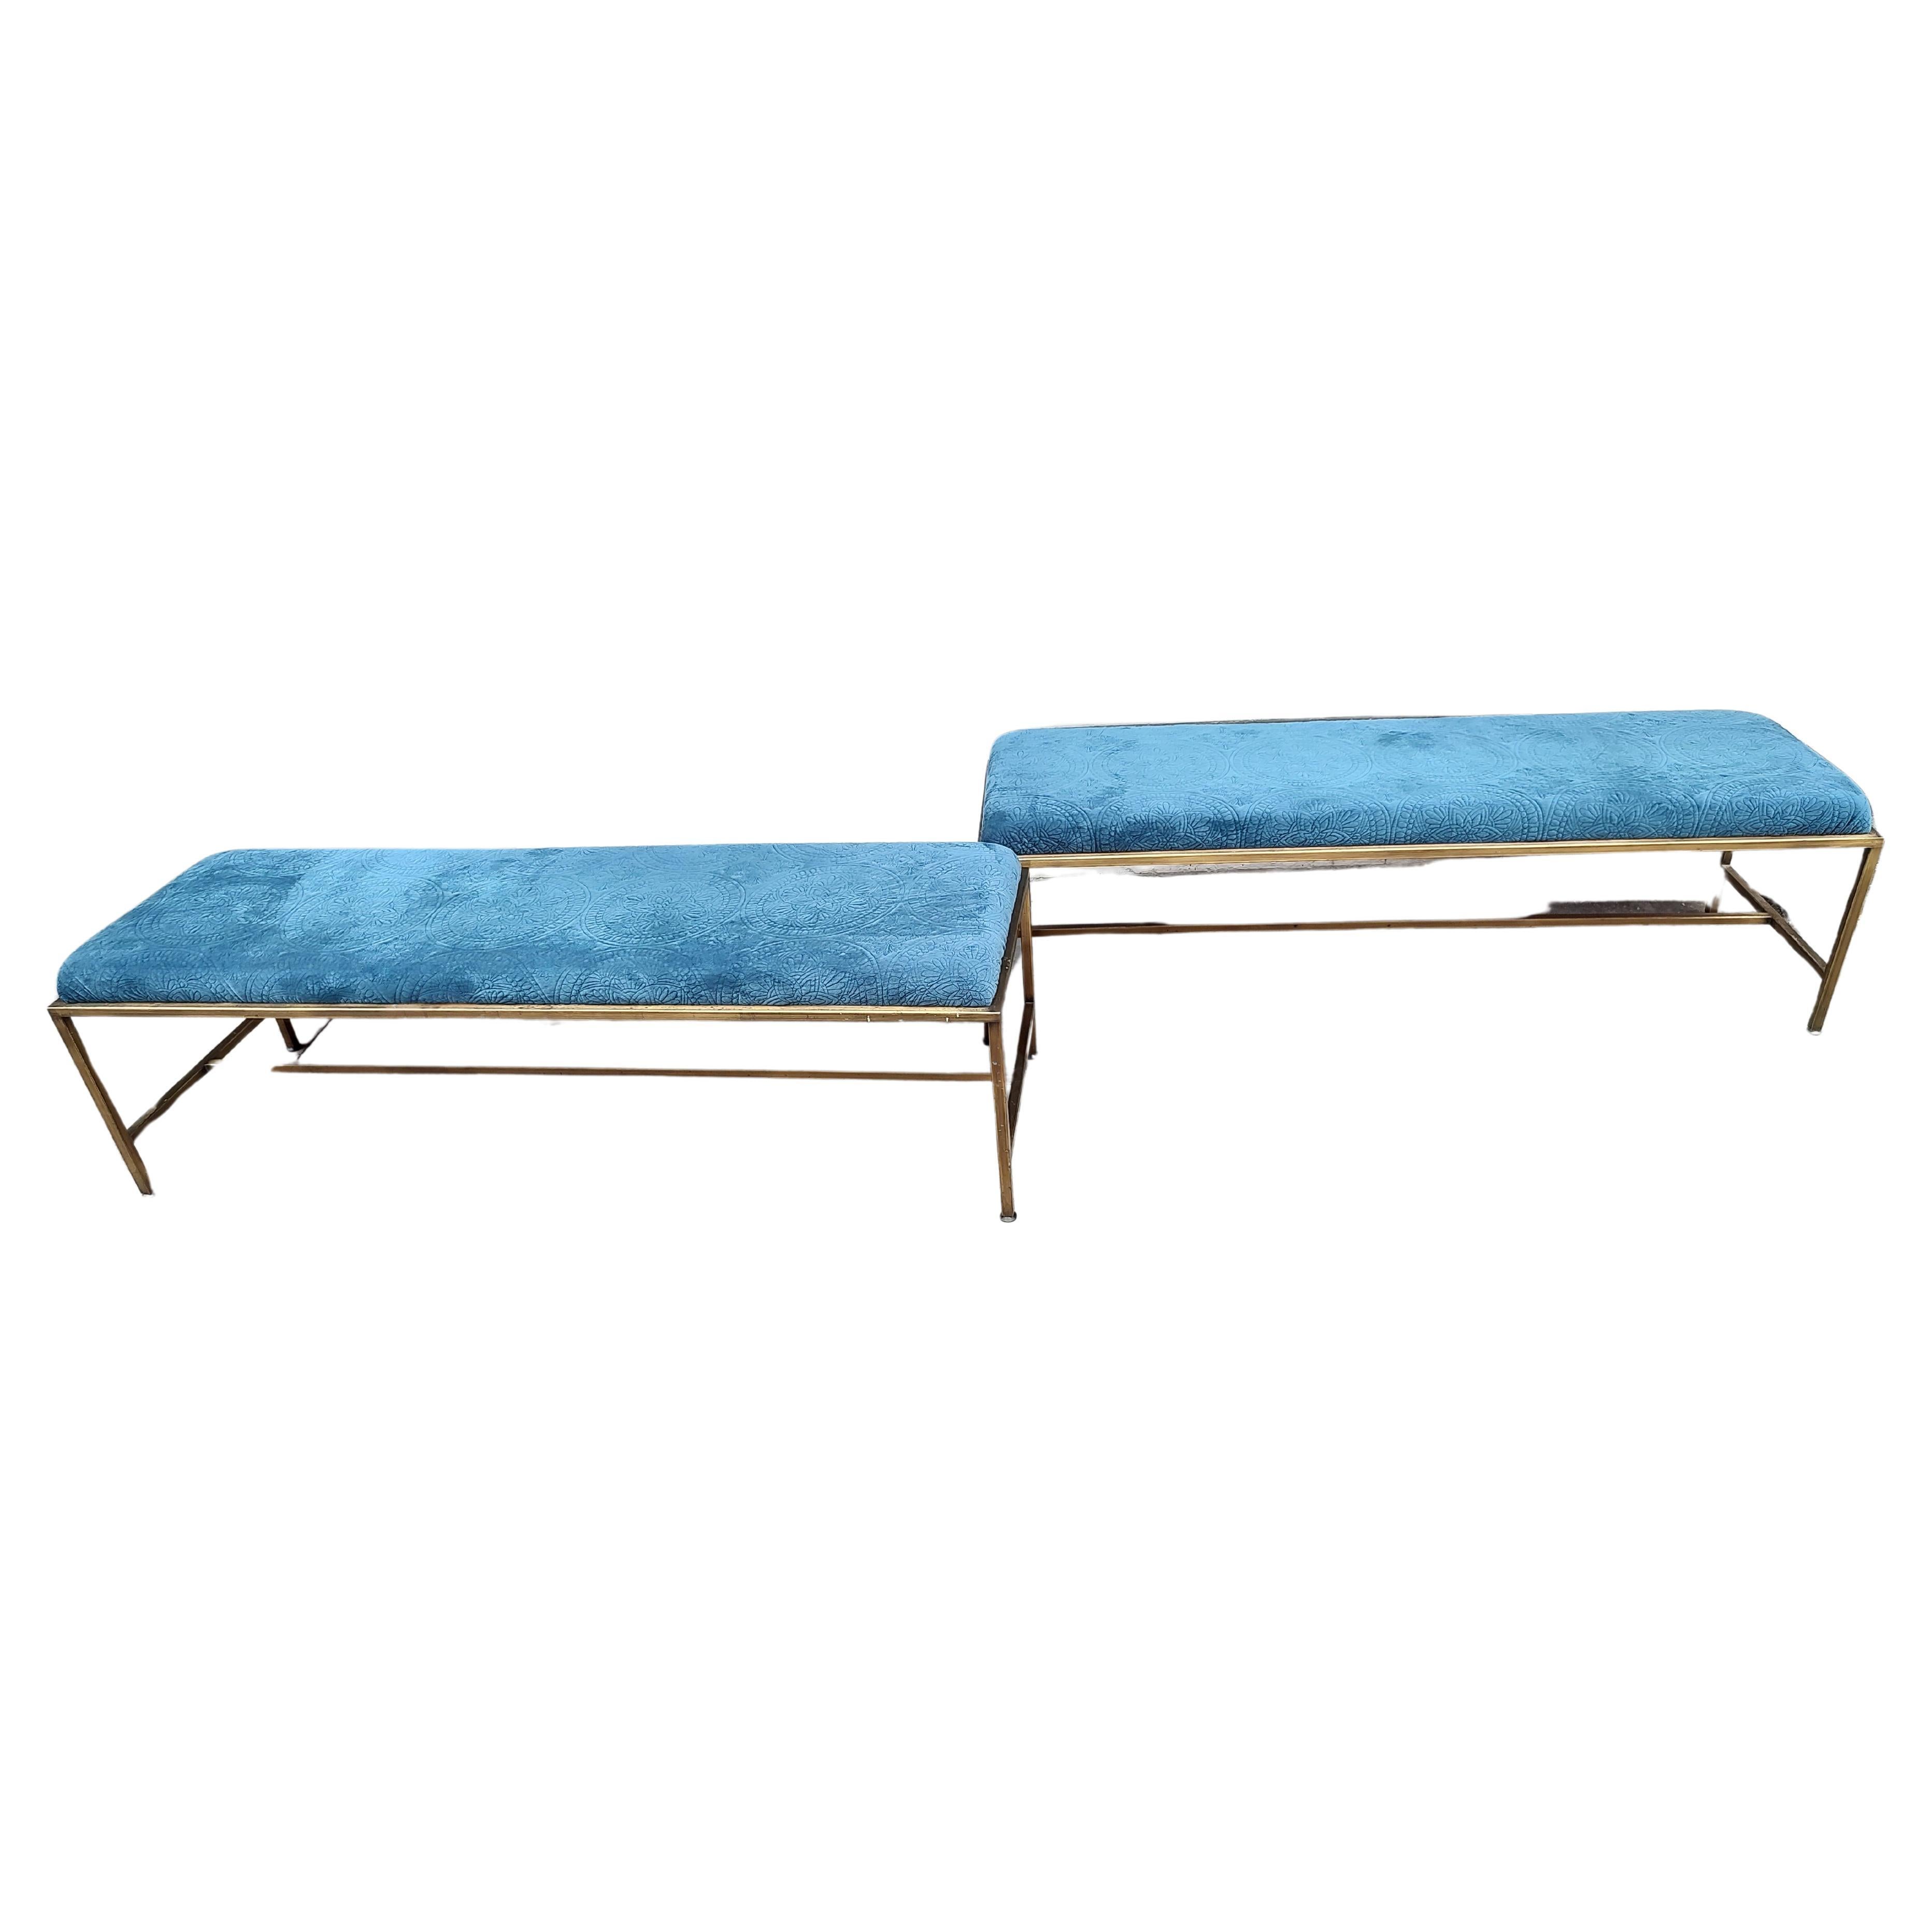 Fabulous Mid-Century Modern bench with Textured Velvet Upholstery. In very good condition with minimal wear. New Fabric. Multiple uses for these pieces, foot of bed or vanity bench , entryway flanking each other. Many other possibilities. Two spots